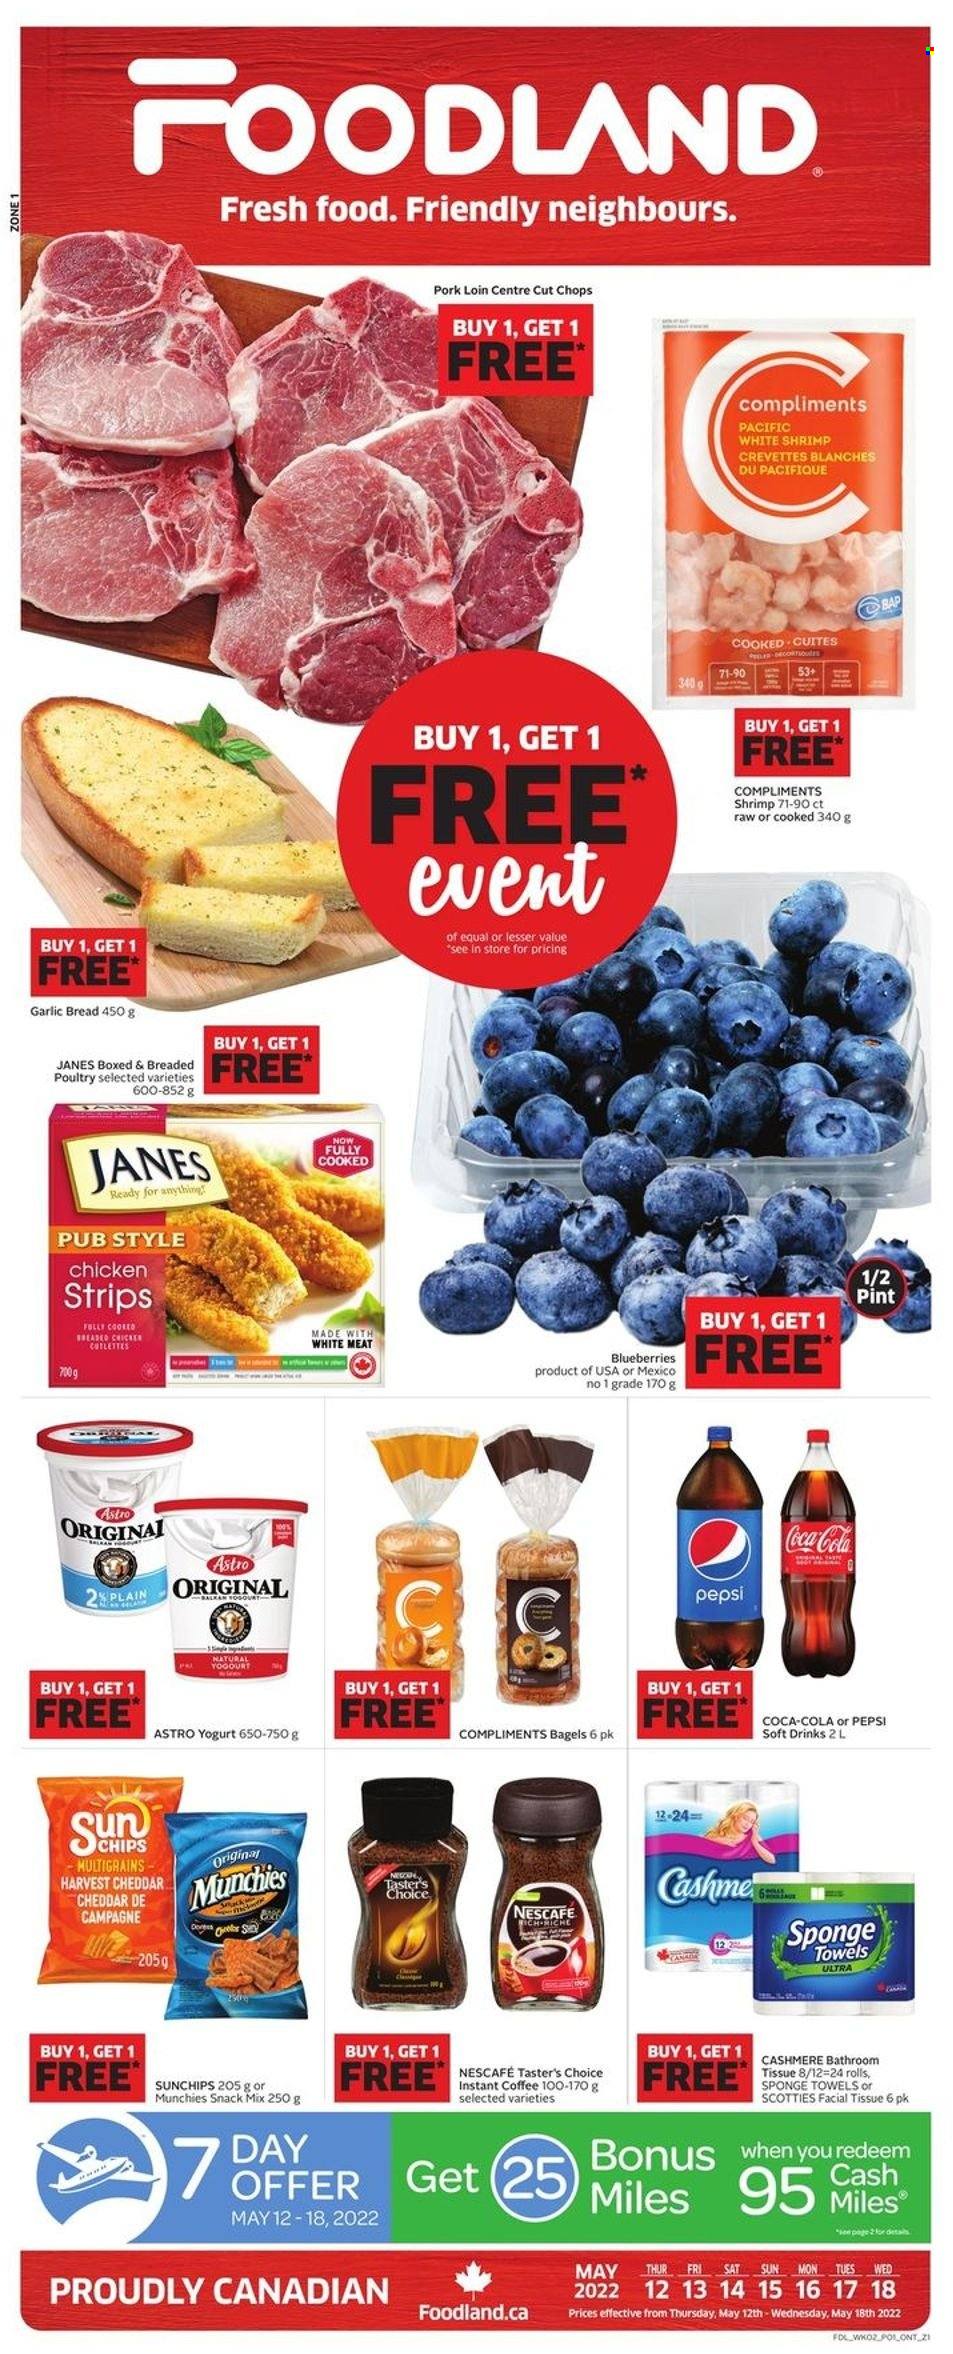 thumbnail - Foodland Flyer - May 12, 2022 - May 18, 2022 - Sales products - bagels, bread, blueberries, shrimps, cheese, yoghurt, strips, chicken strips, snack, chips, Coca-Cola, Pepsi, soft drink, instant coffee, pork loin, pork meat, Nescafé. Page 1.